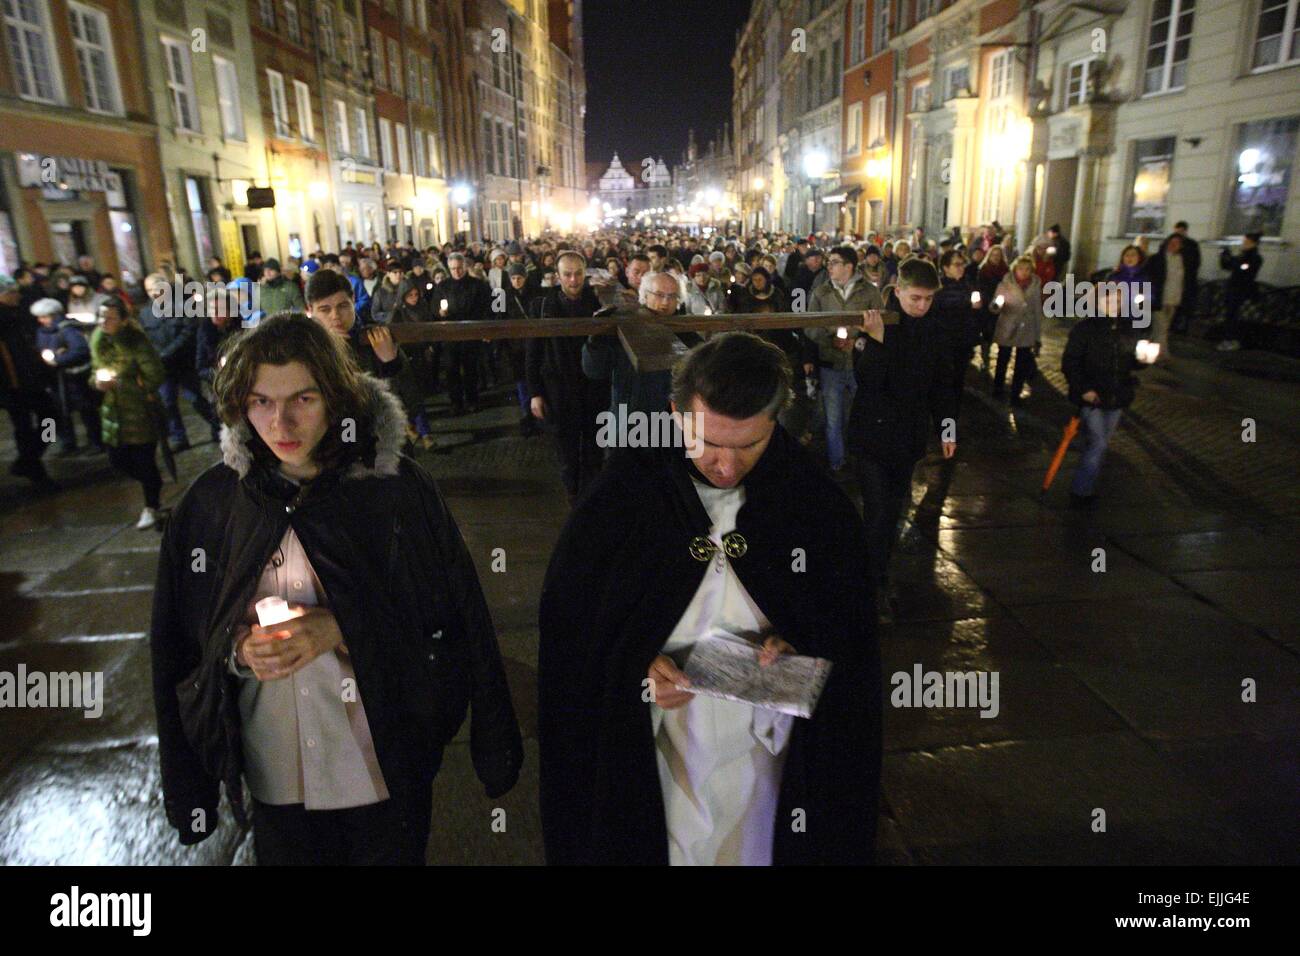 Gdansk, Poland 27th, March 2015  Hundreds of Catholics participate in annual Way of Cross at Gdansk Old City streets. Stock Photo